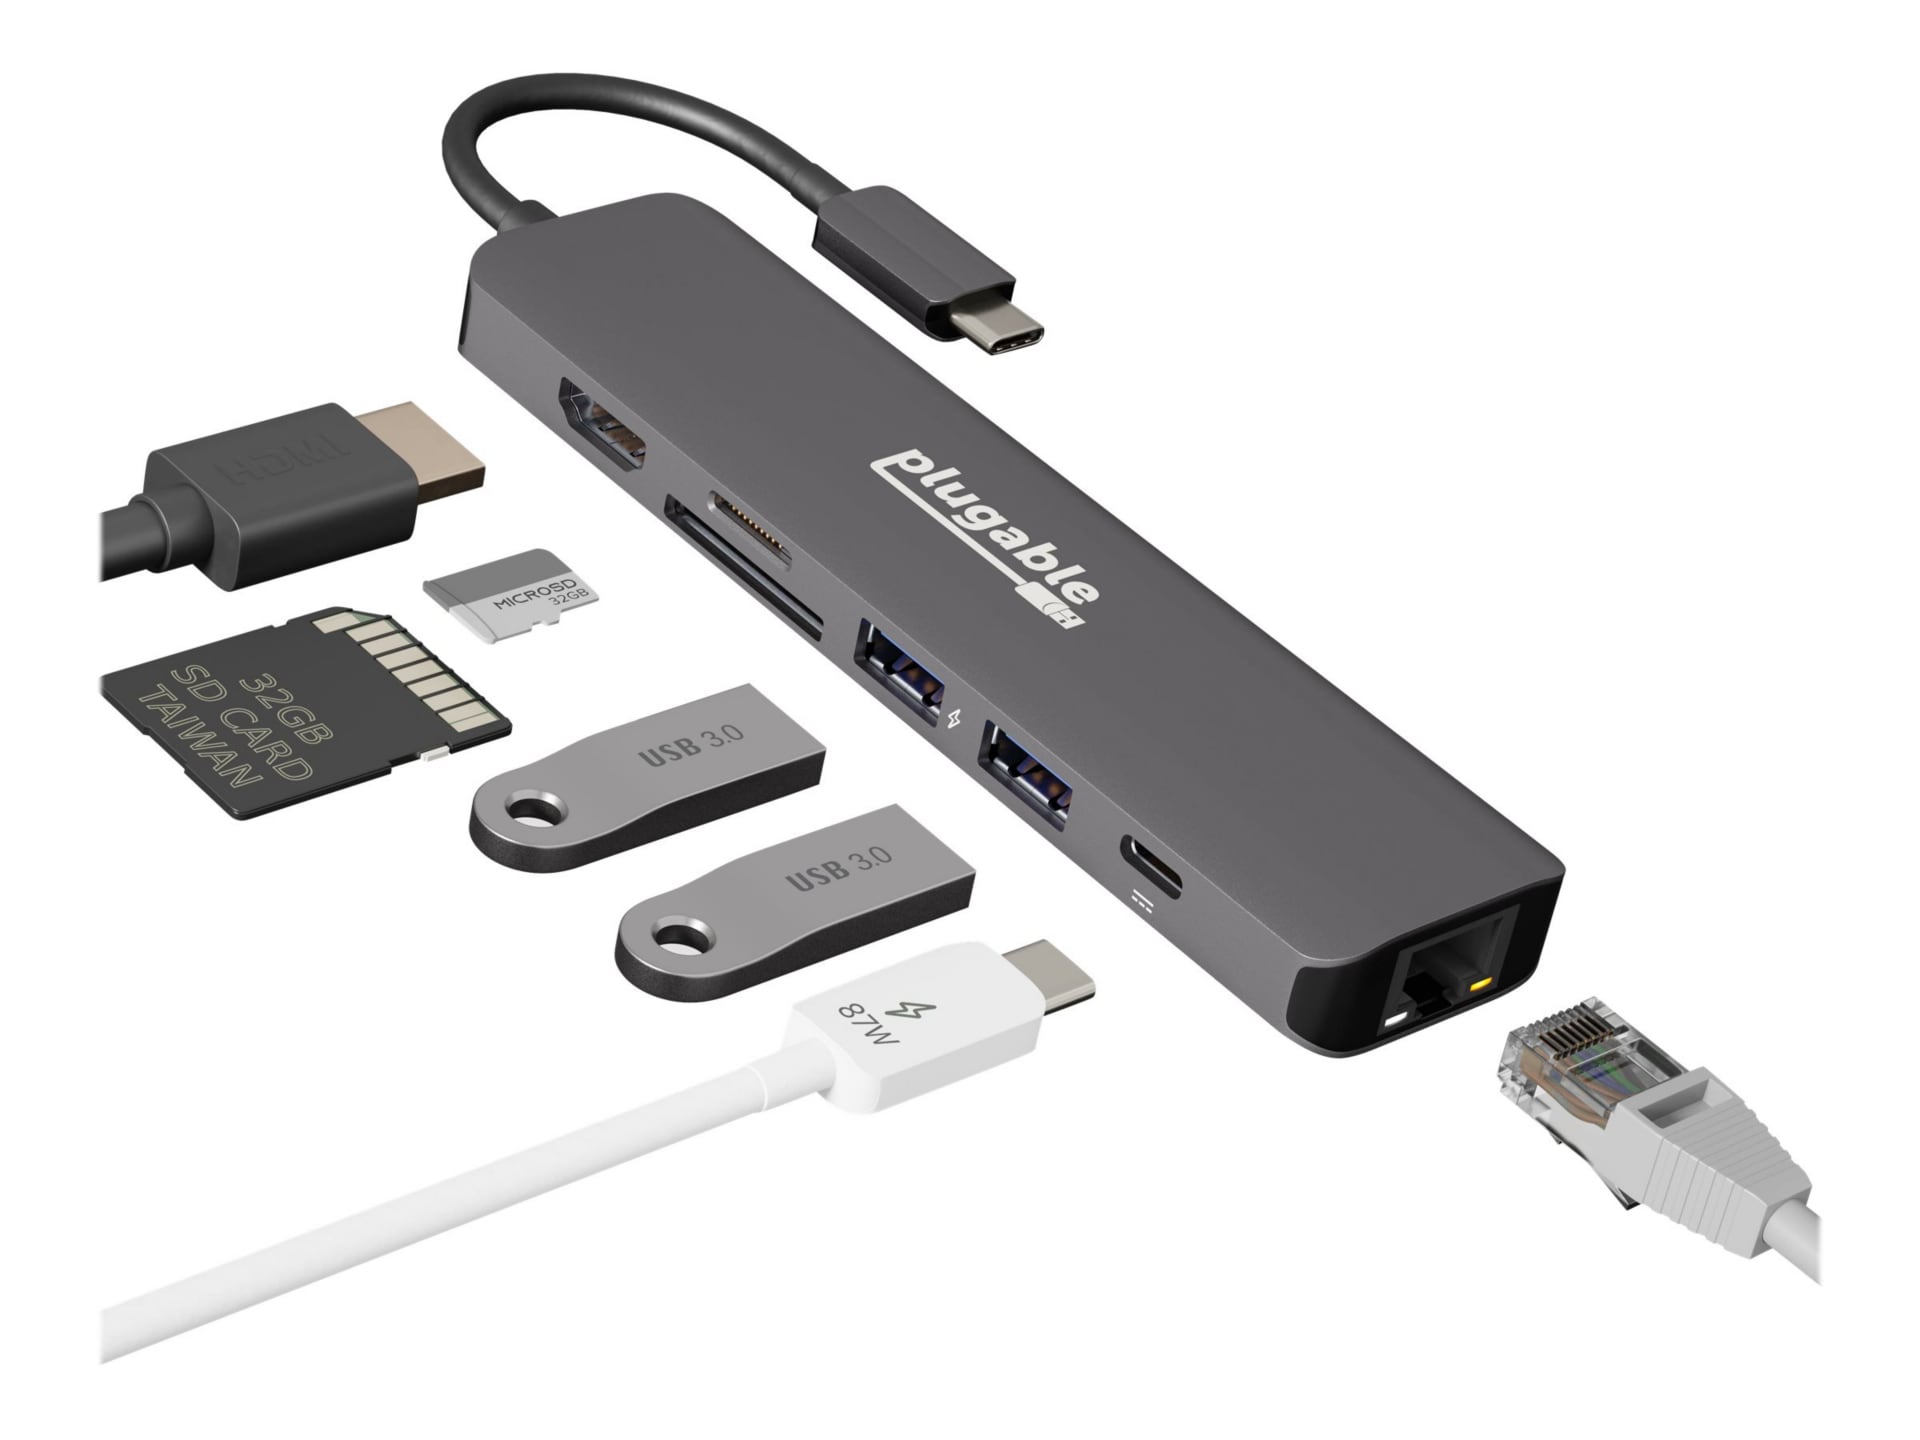 Plugable Plugable 7-in-1 USB C Hub Multiport Adapter w/ Ethernet